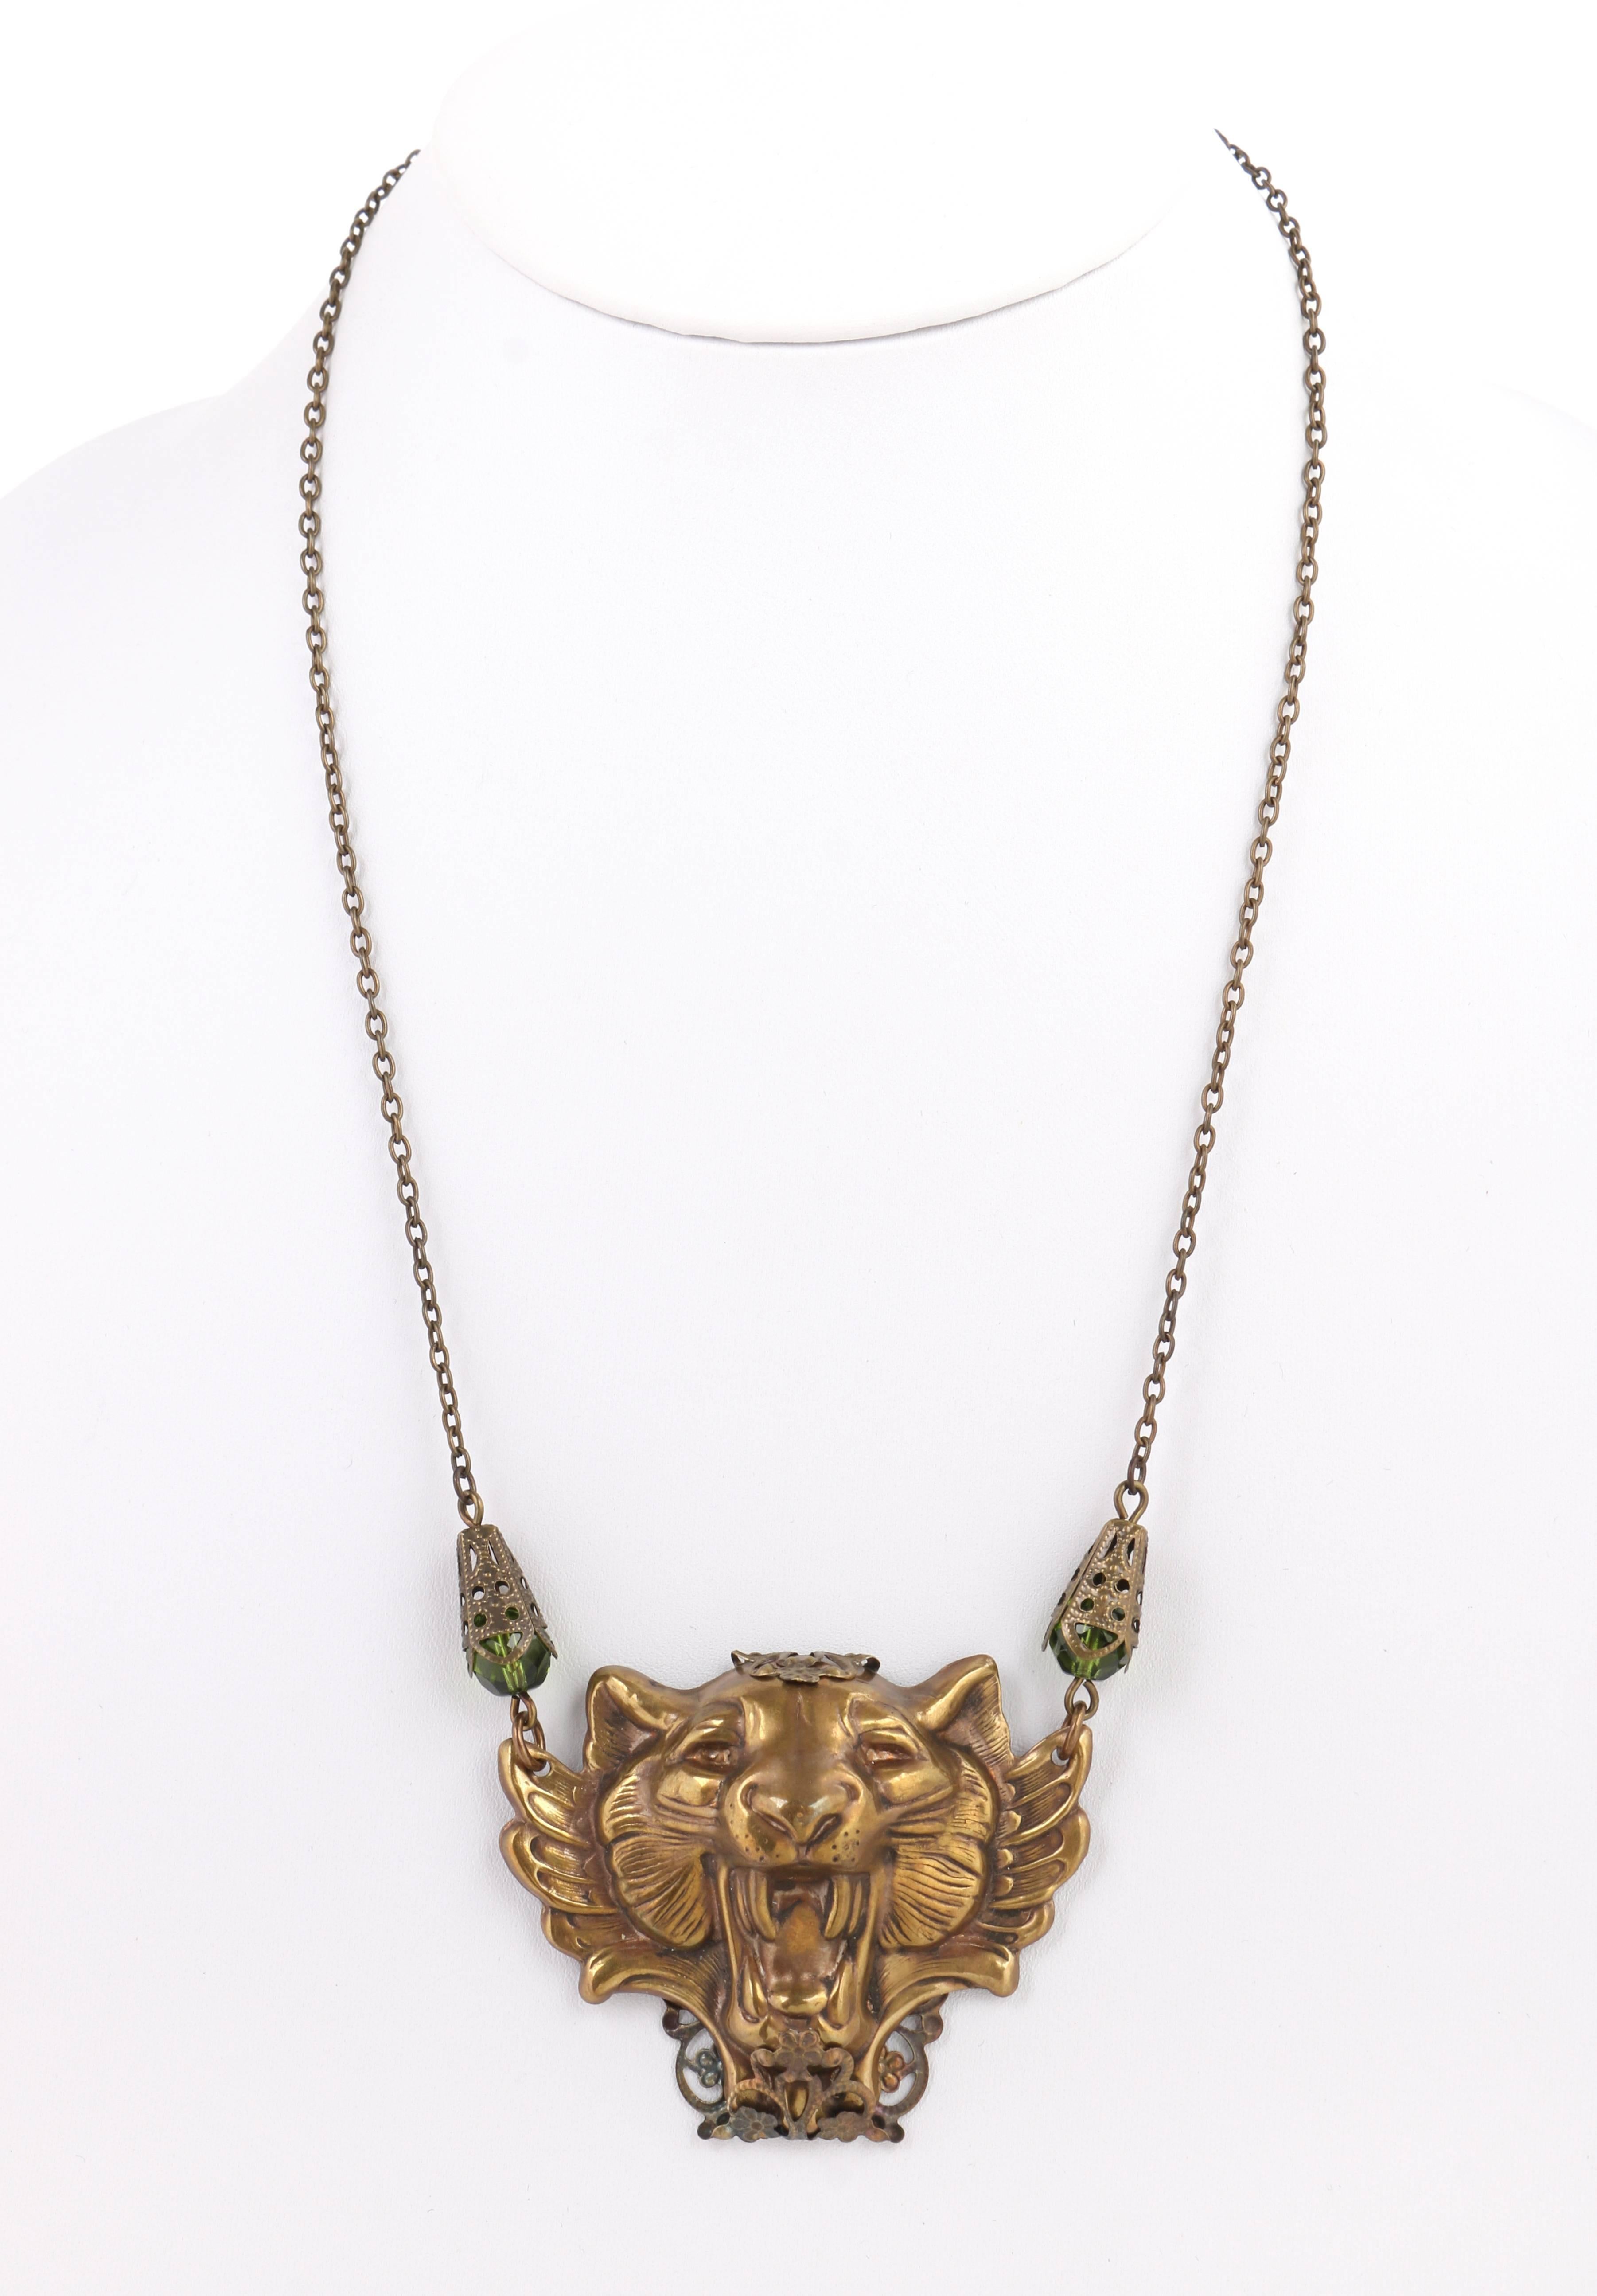 Vintage brass pressed metal winged tiger / lion / cat head statement pendant necklace. Brass-toned metal winged large wild cat head pendant. Floral open work filigree brass-toned metal design wrapped around at back of pendant from top to bottom.